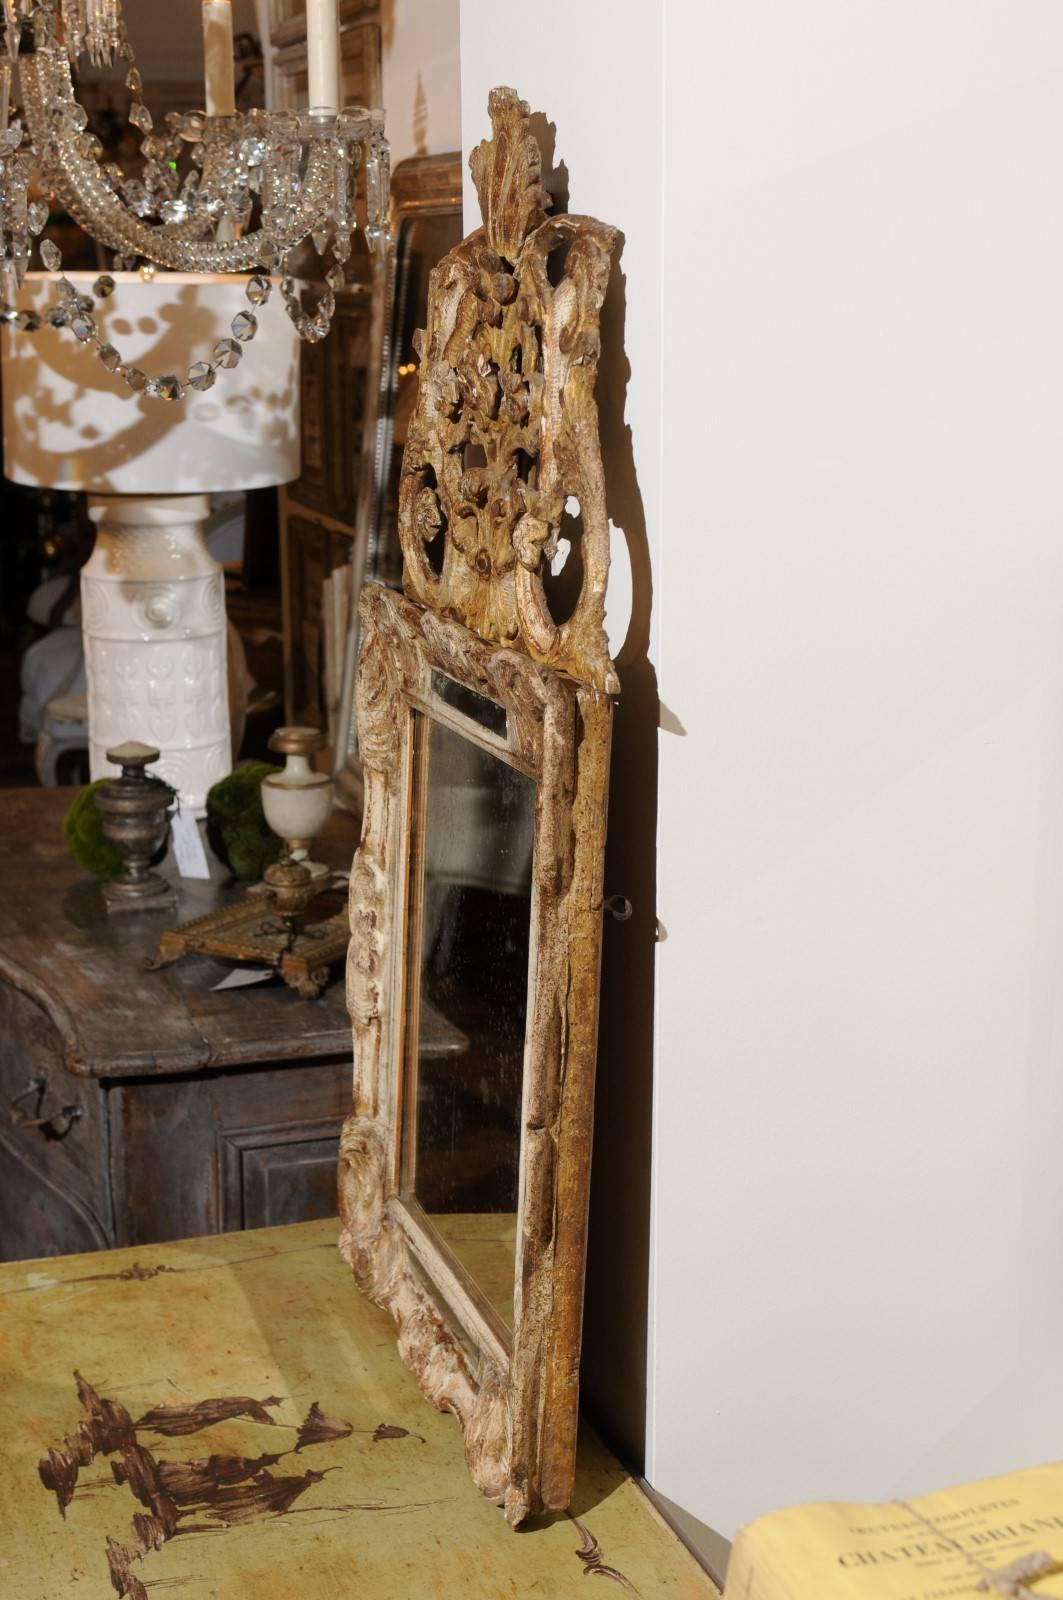 A French mid-19th century gilt and painted Louis XV style mirror with detachable carved crest. This small French mirror features an eye-catching carved crest adorned with various volutes and acanthus leaves delicately flanking central flowers and